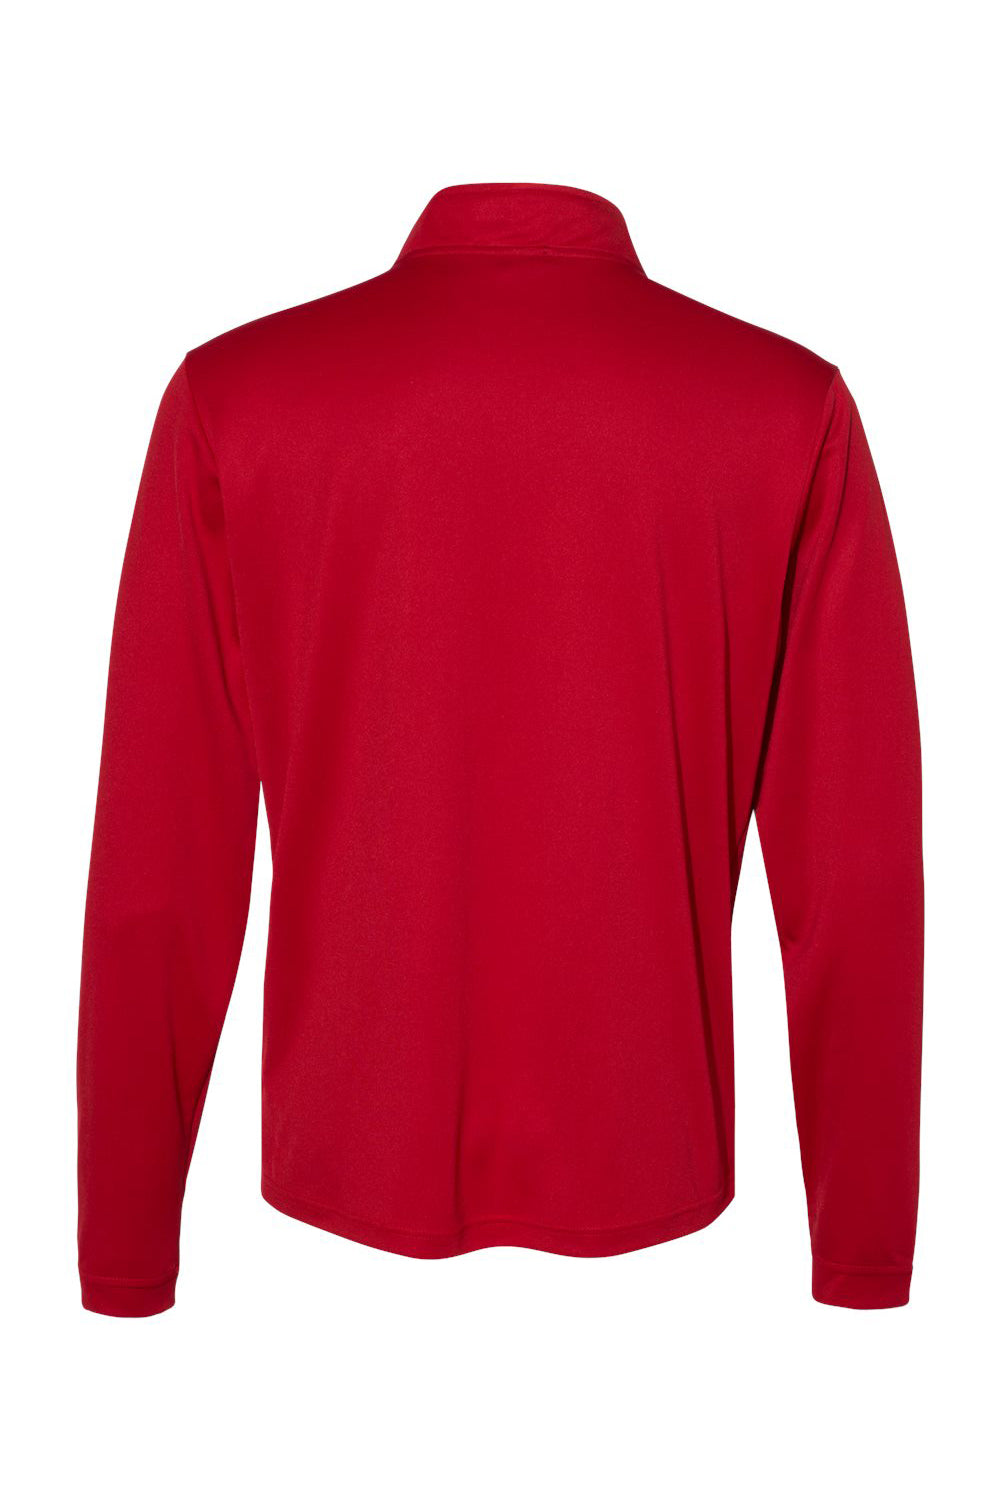 Adidas A401 Mens 1/4 Zip Pullover Power Red Flat Back